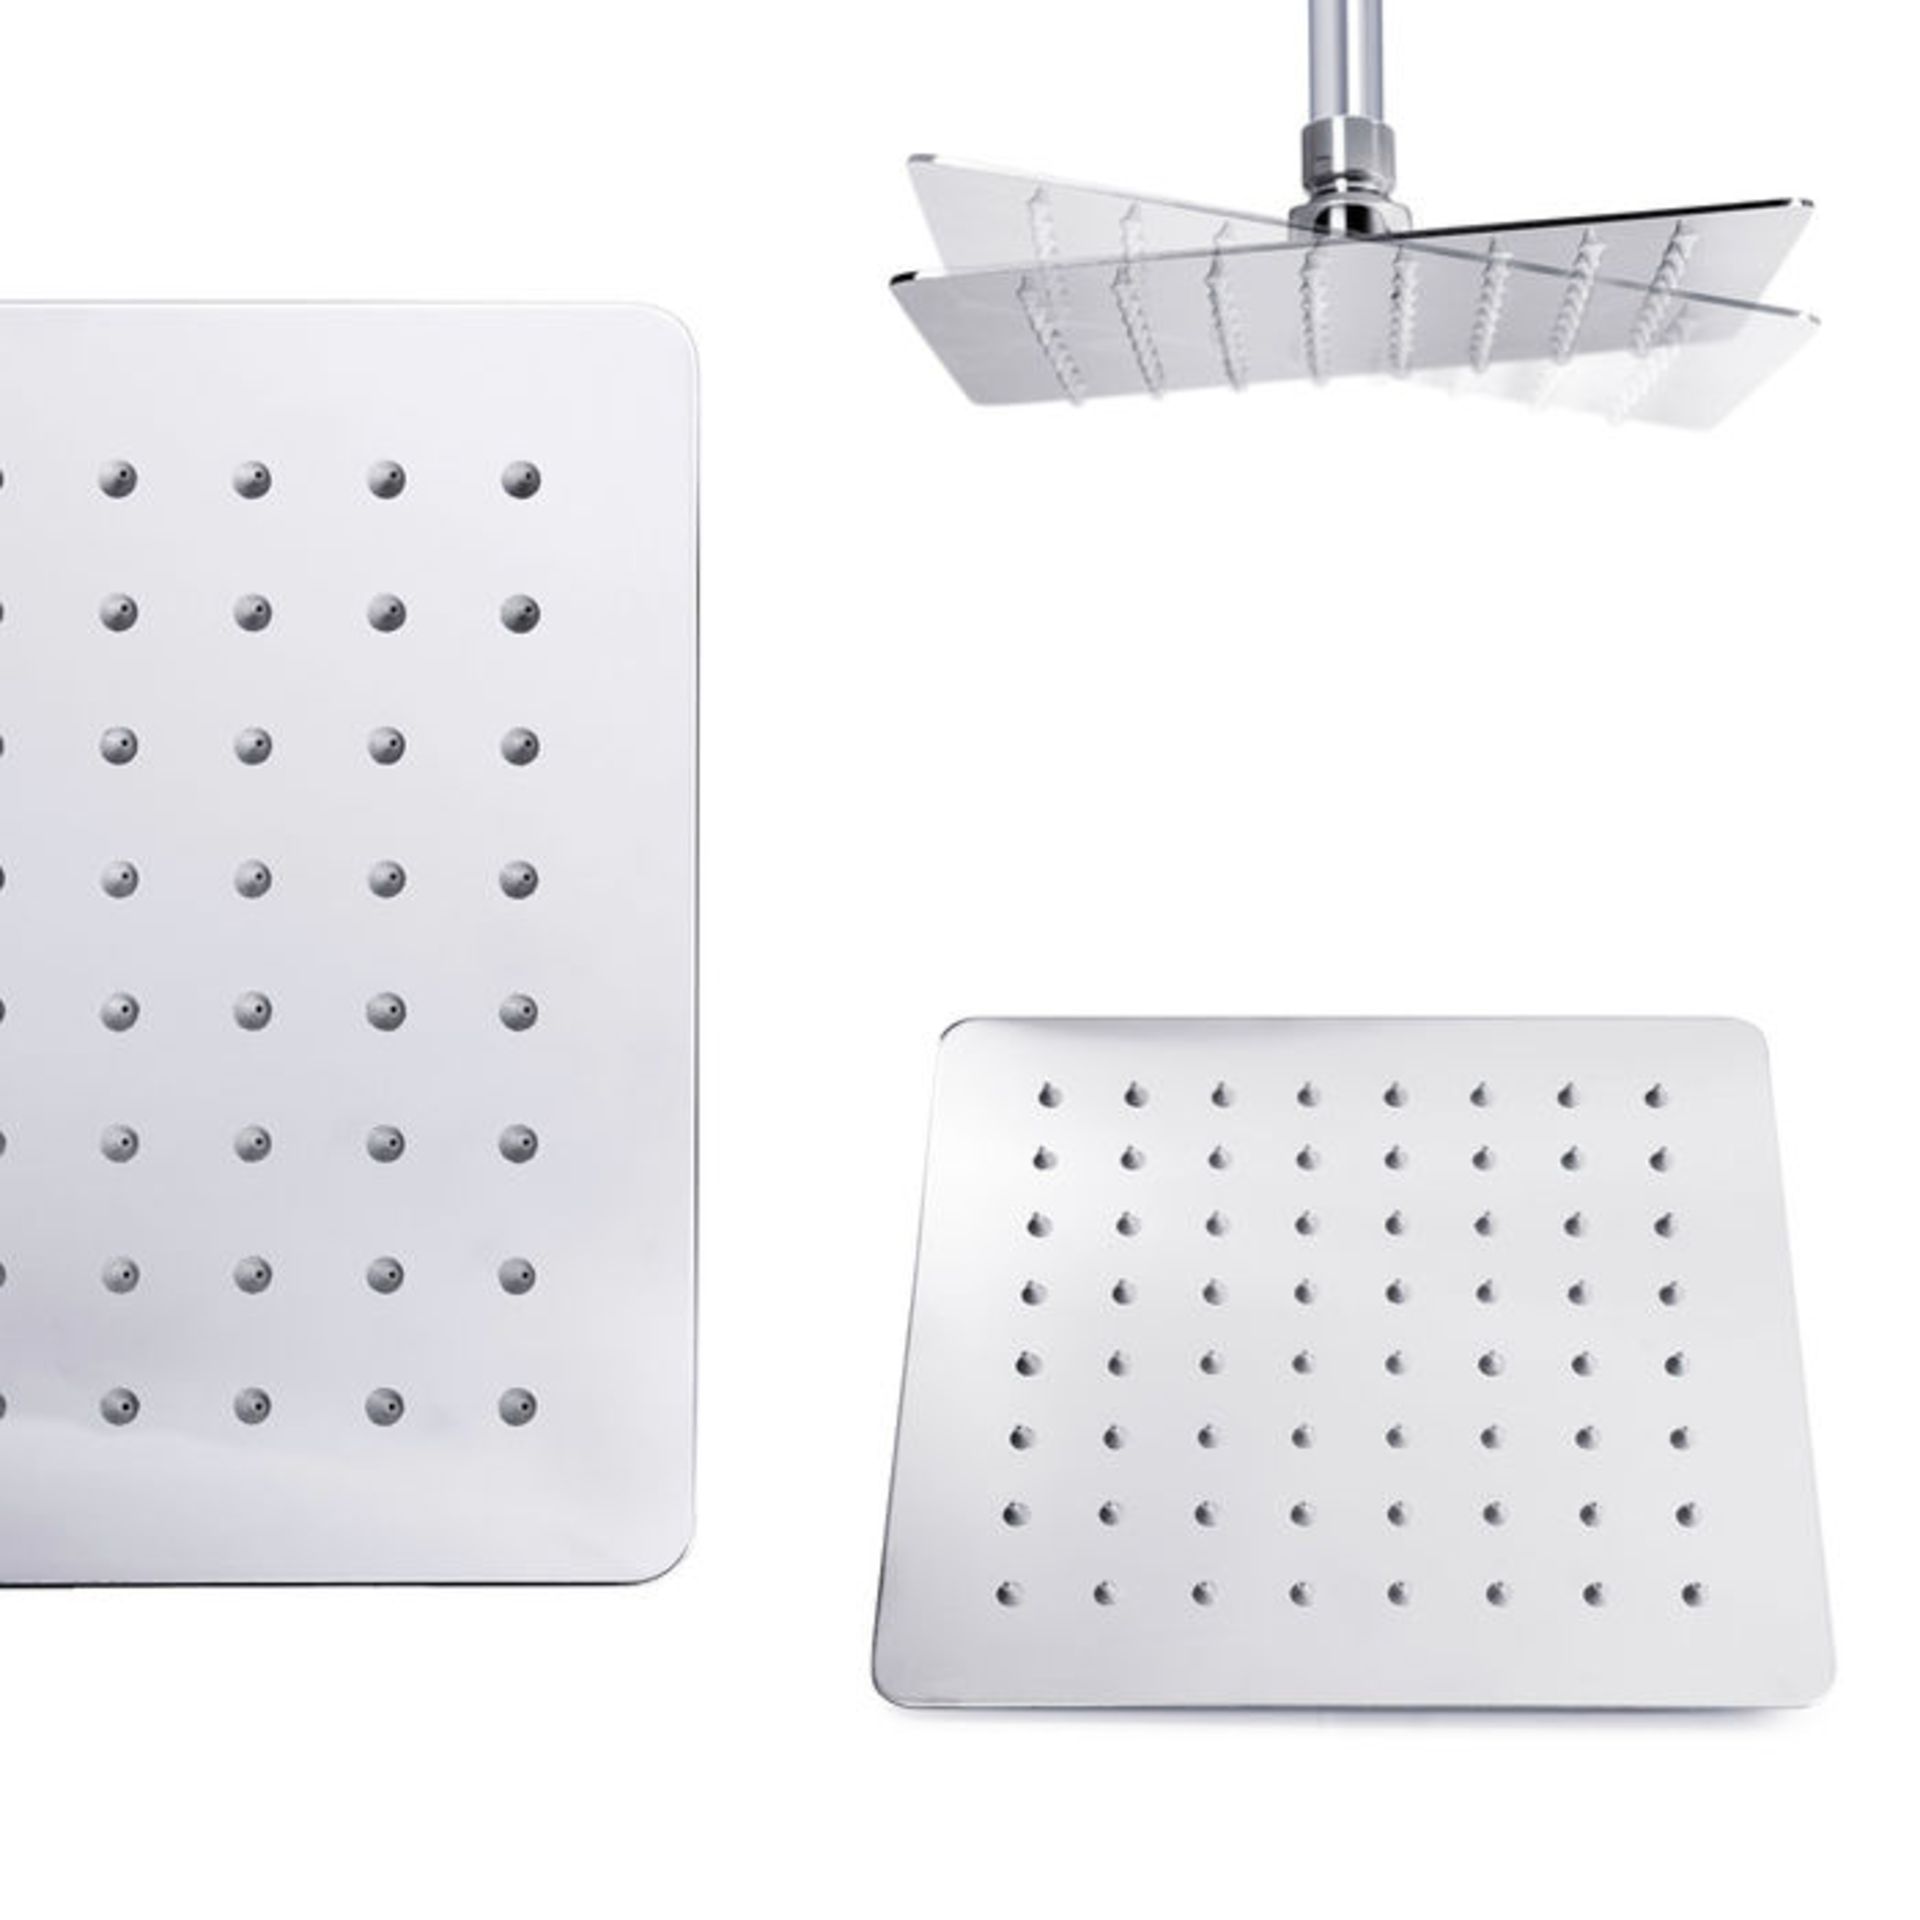 (VZ2) 200mm Square Shower Head. Solid metal structure Can be wall or ceiling mounted Features a